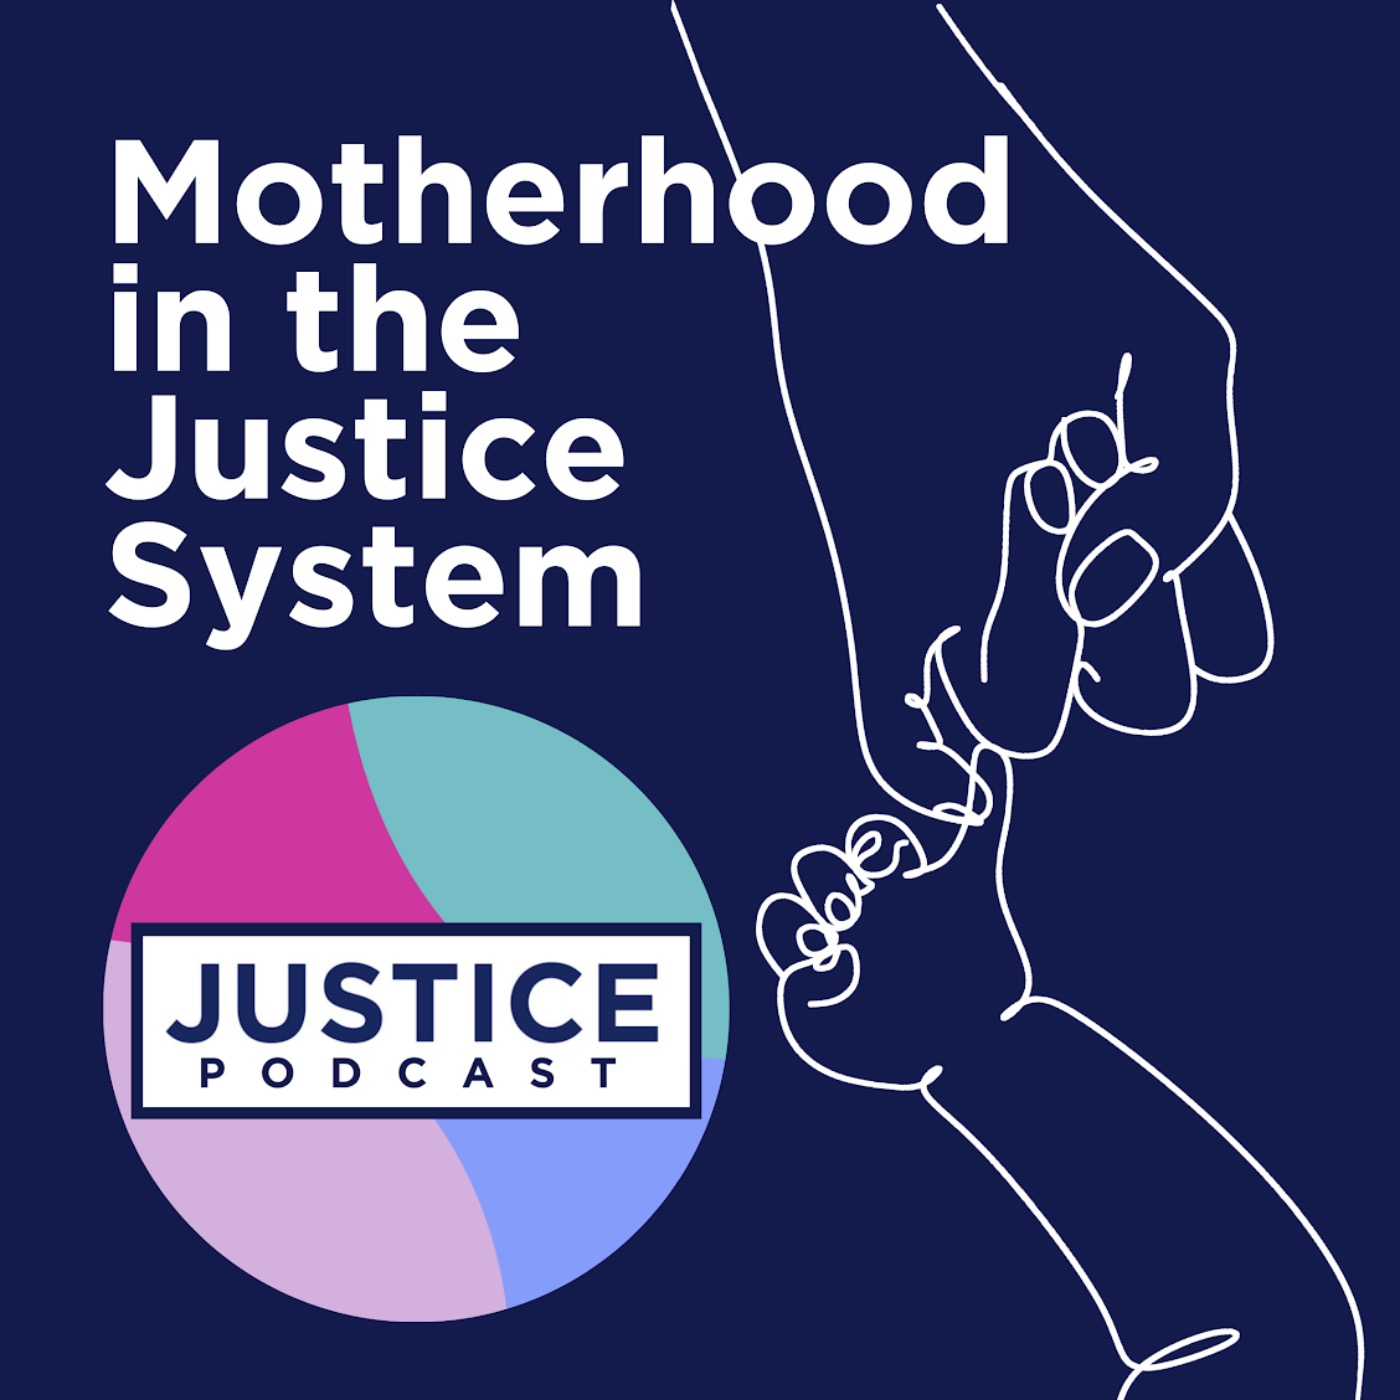 Mothers in the justice system – the key issues and challenges